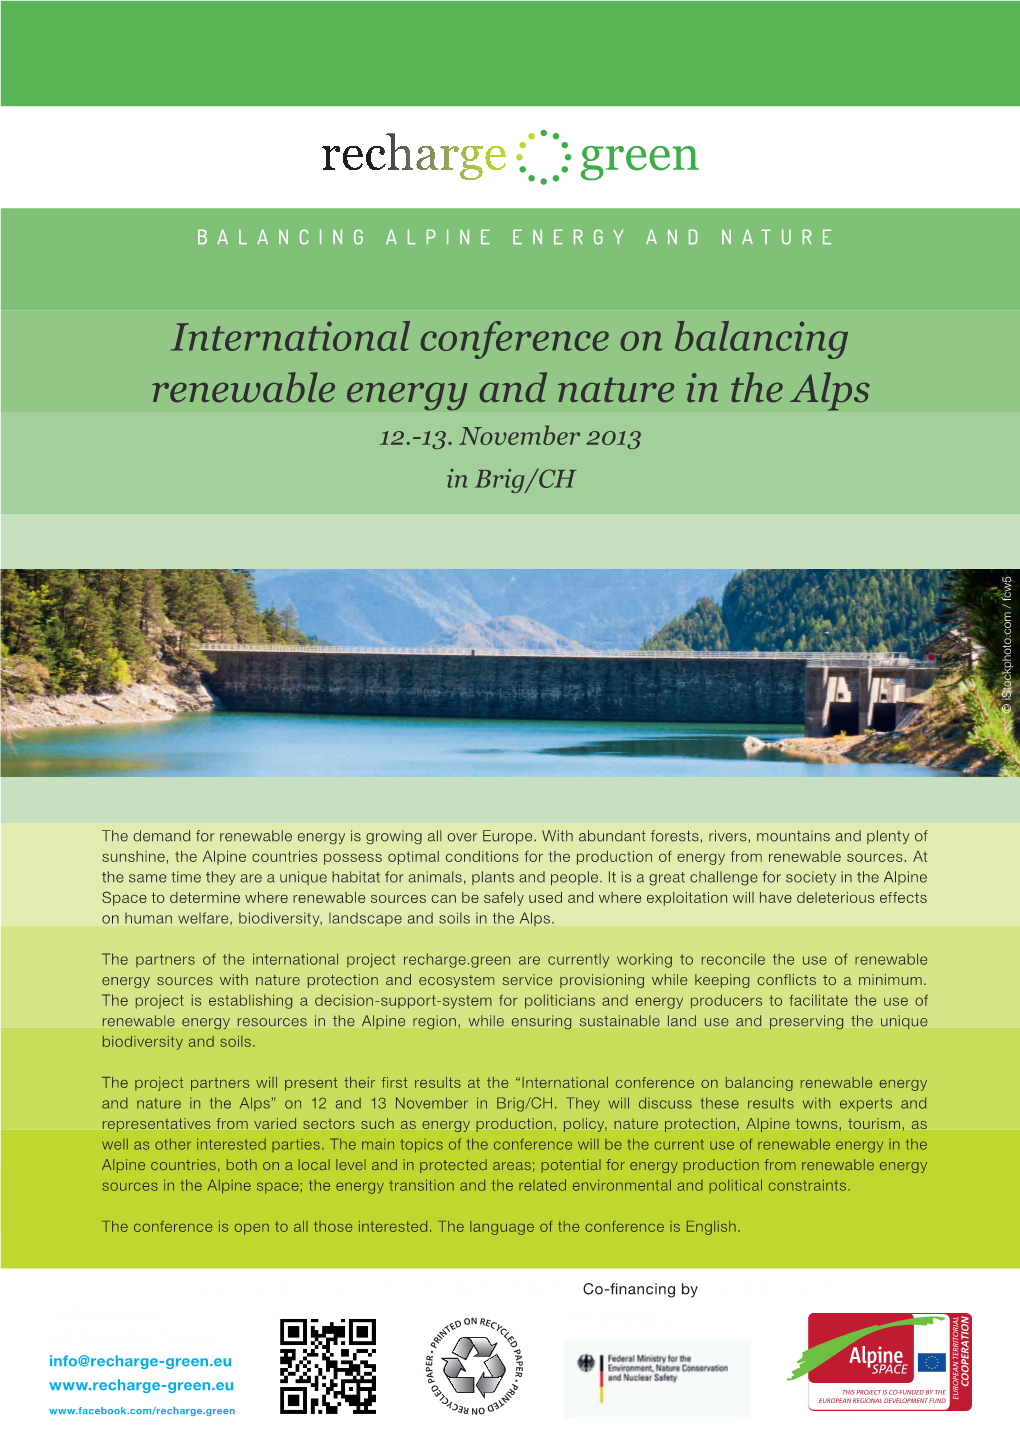 International Conference on Balancing Renewable Energy and Nature in the Alps 12.-13